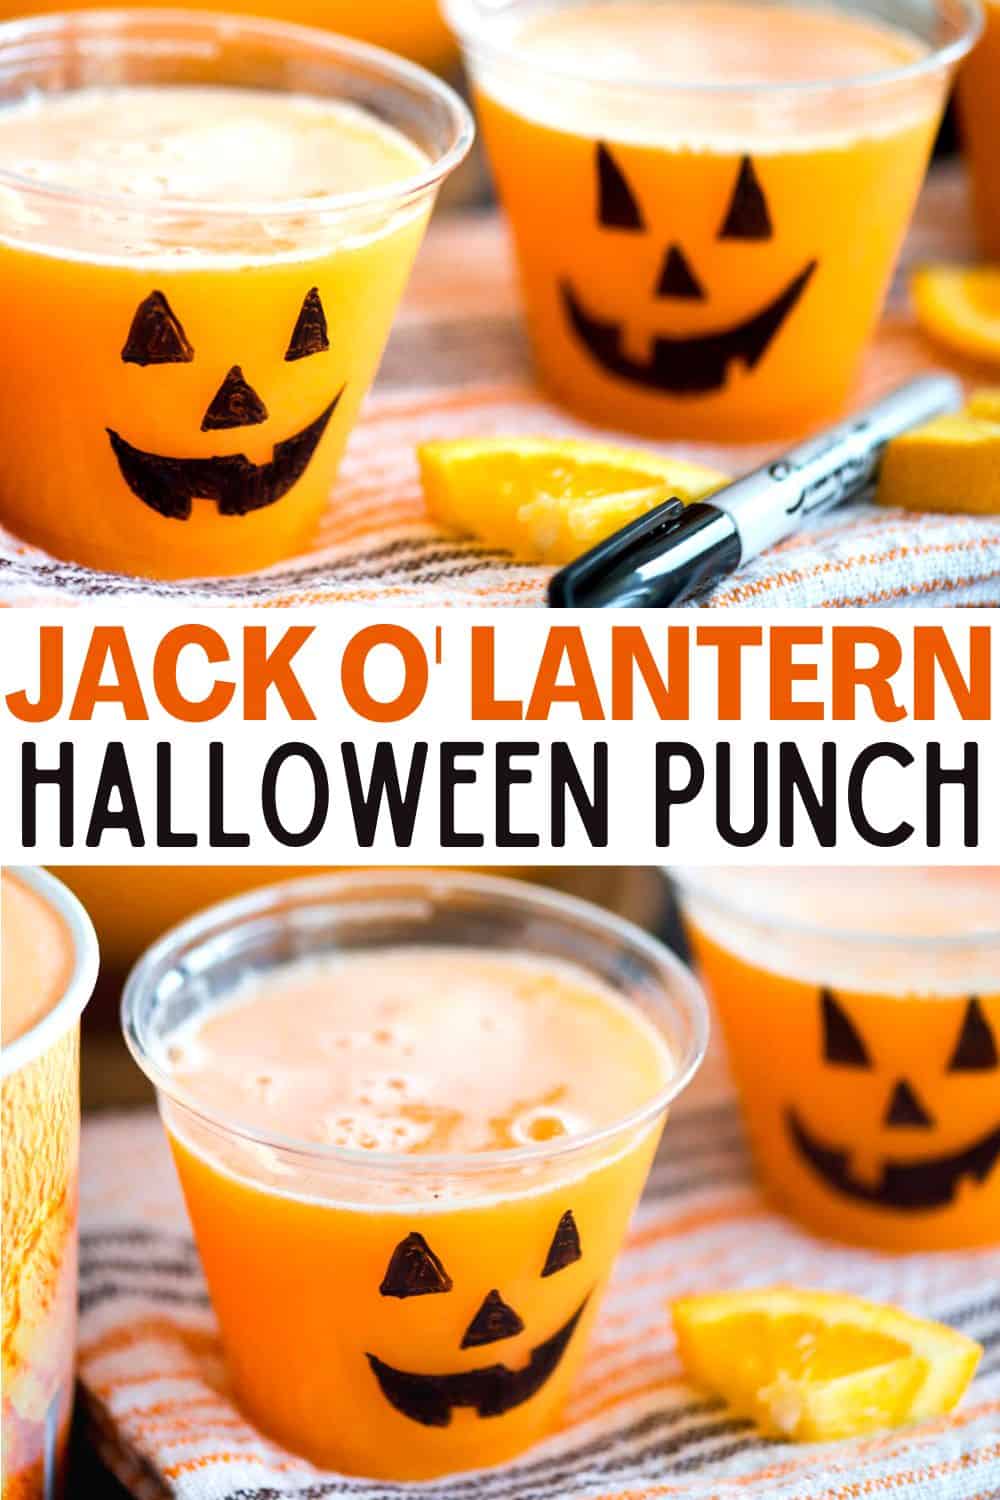 This fizzy, kid-friendly, non-alcoholic Halloween punch is simply made of fruit juice, soda, and orange sherbet. Ready in just minutes!